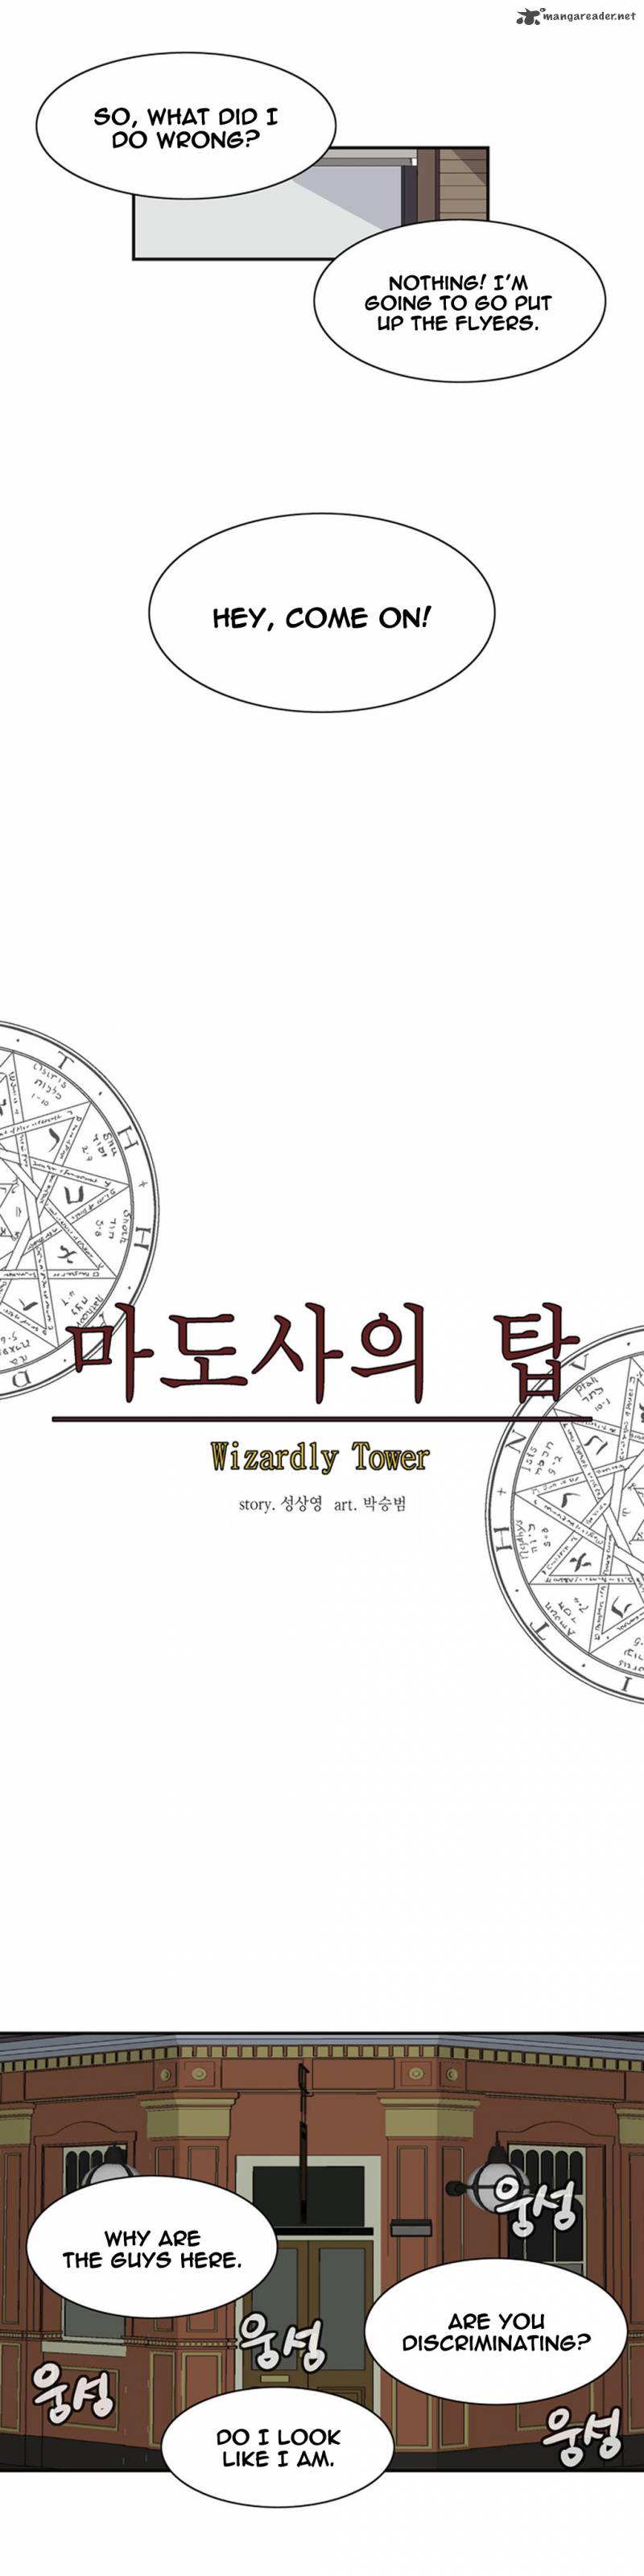 wizardly_tower_30_11